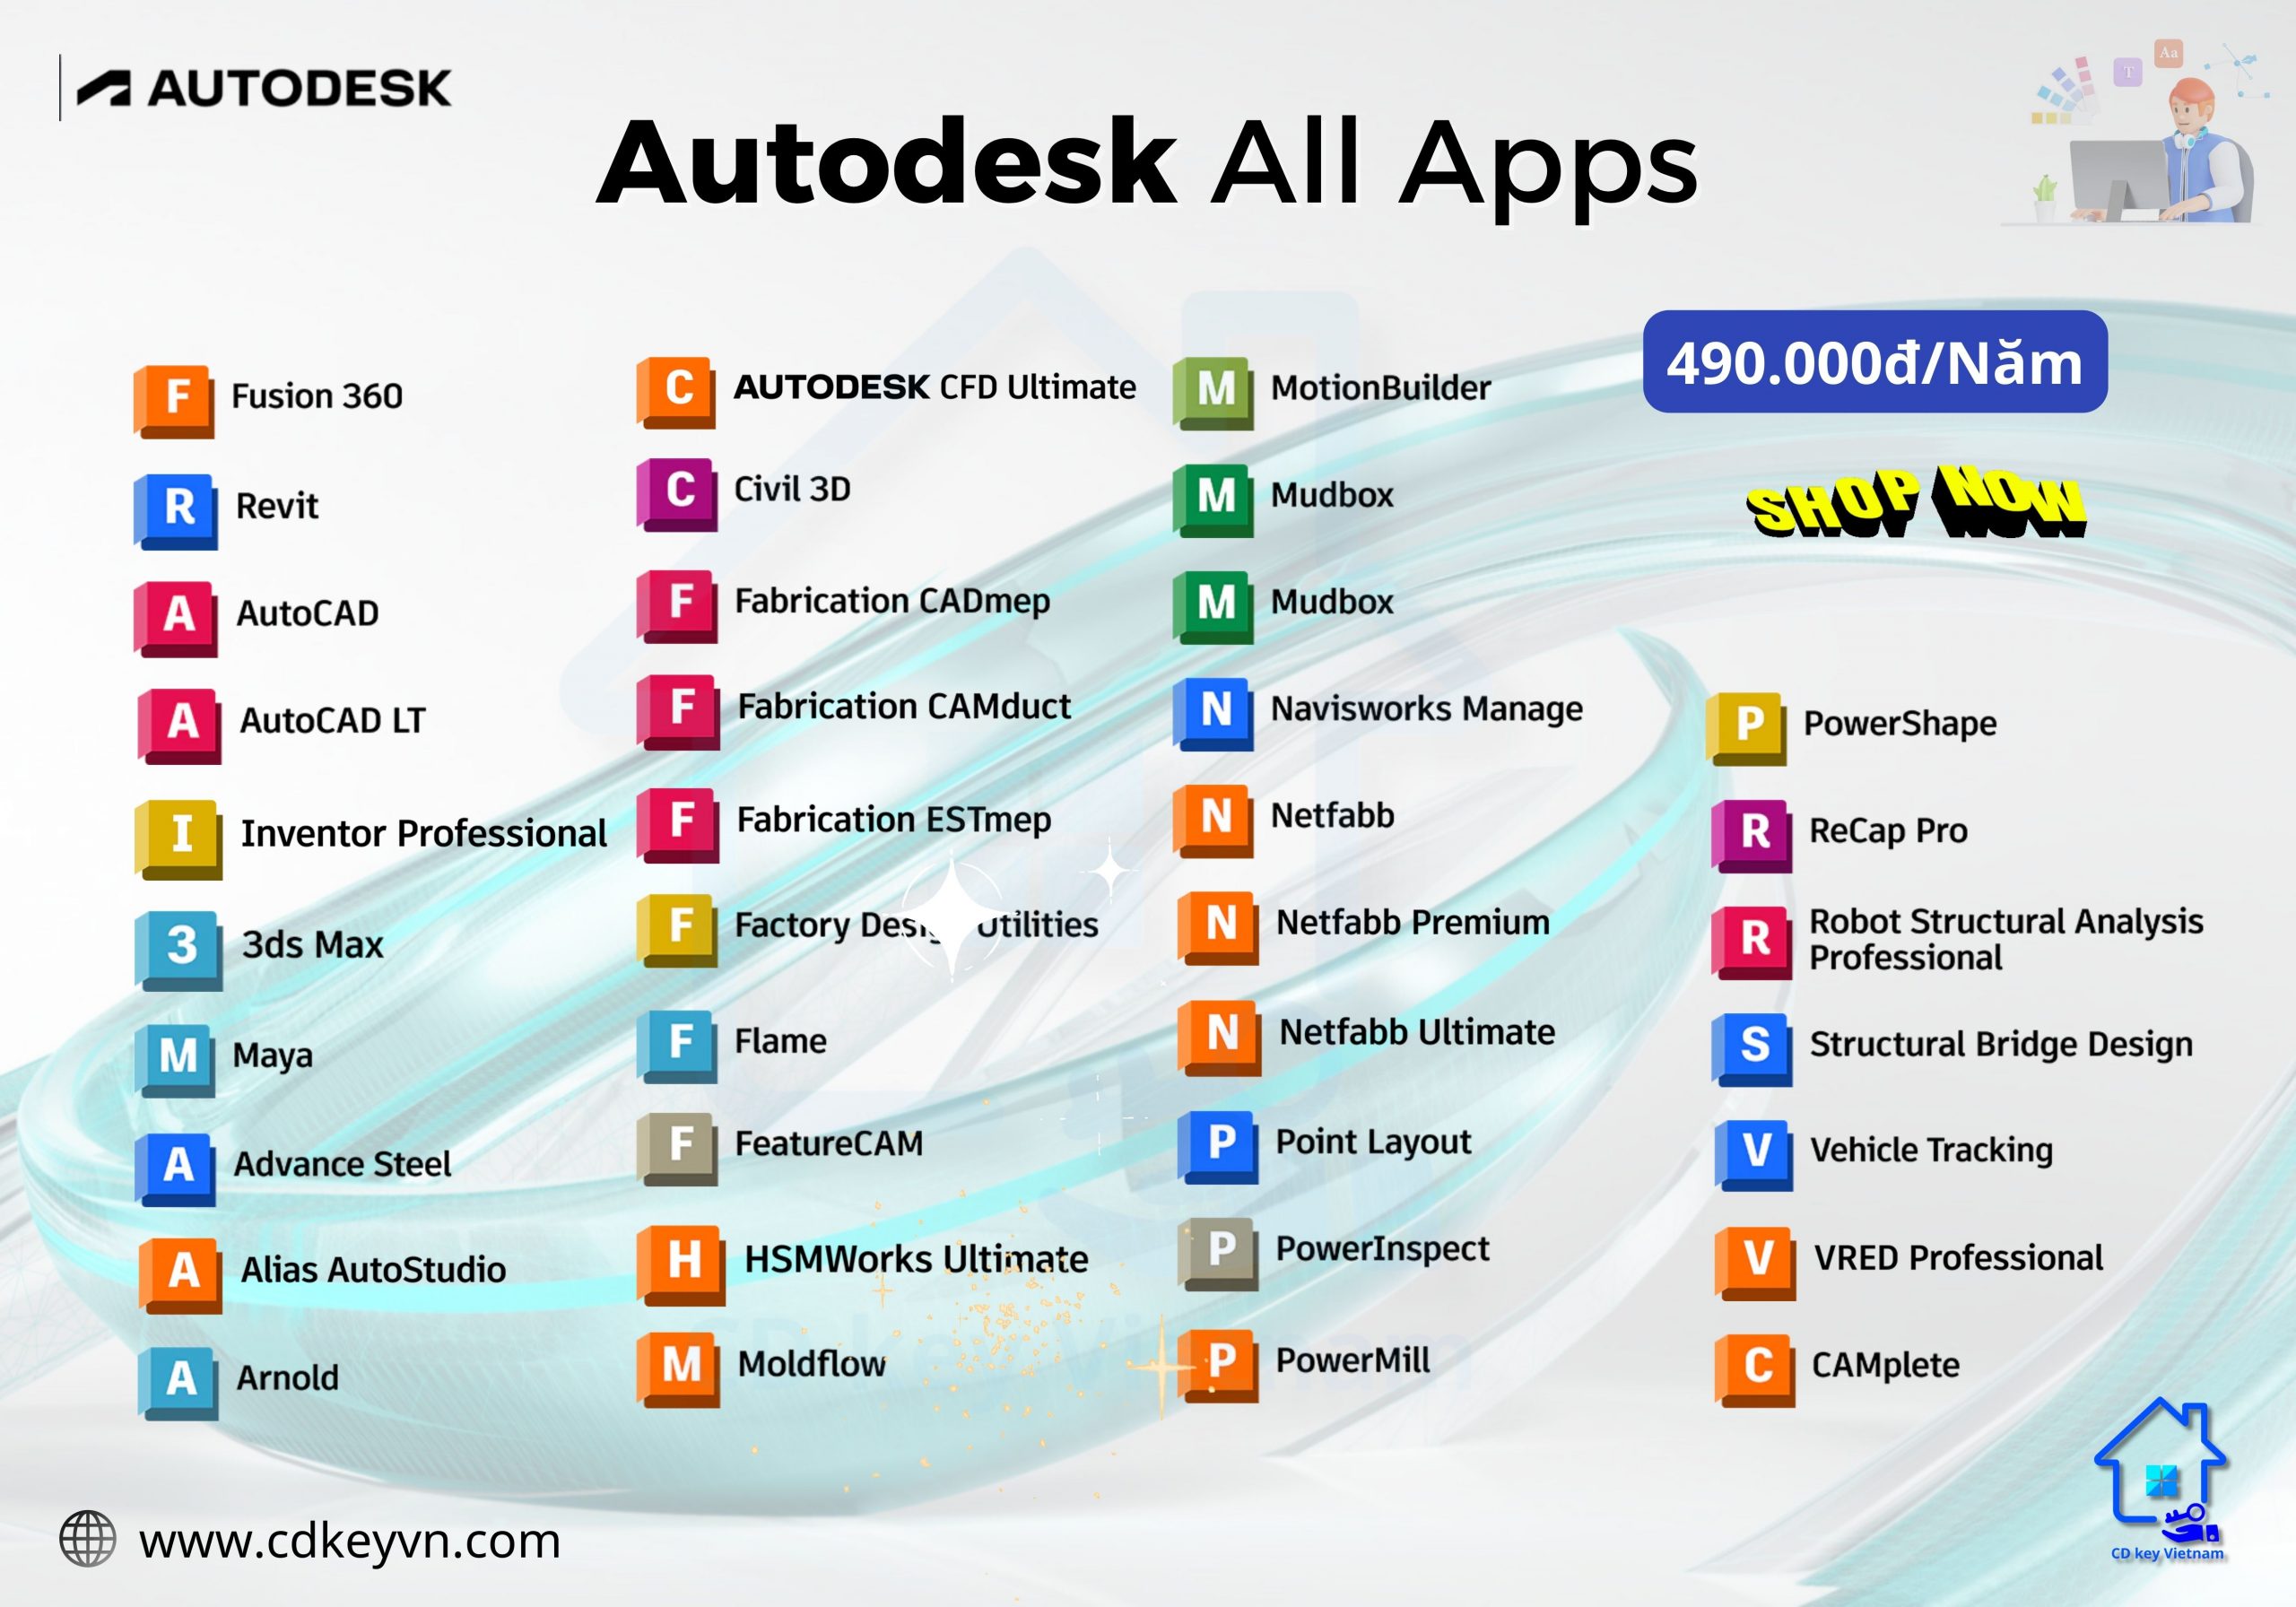 Autodesk all app 3 scaled